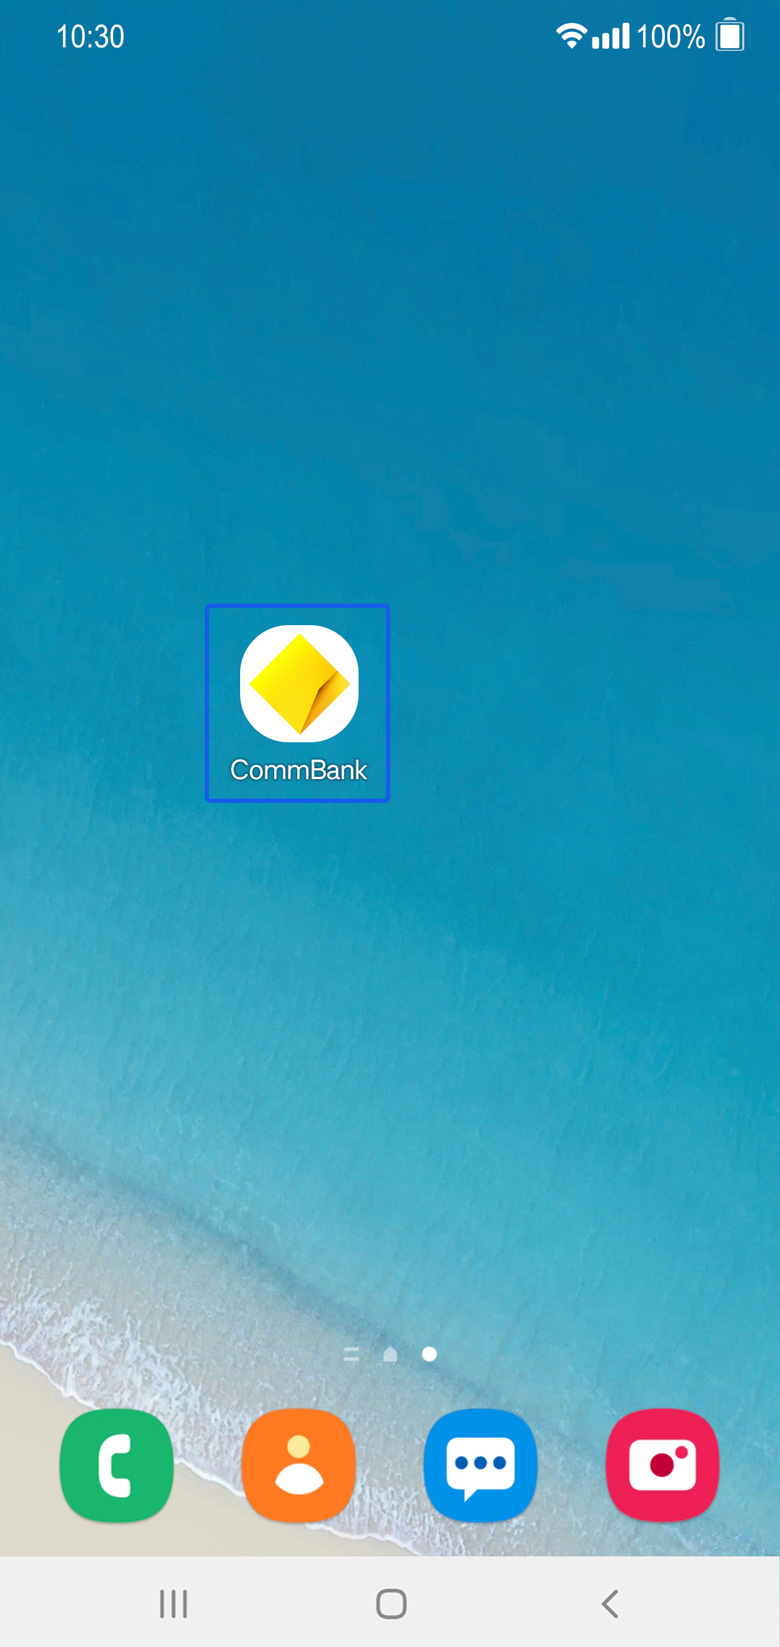 CommBank app icon on mobile screen